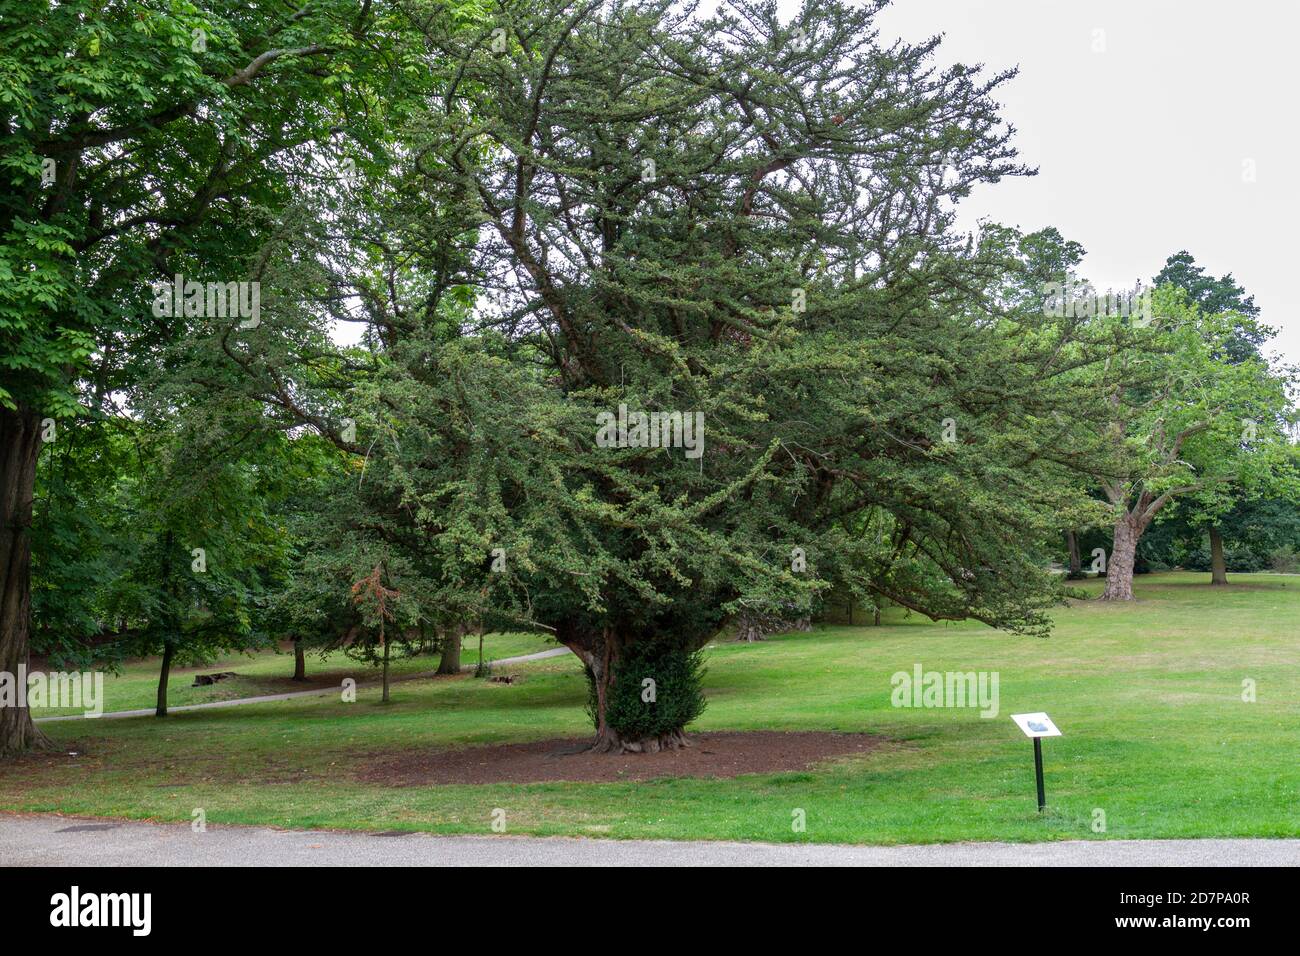 The oldest Yew tree (taxus baccata) thought to be over 600 years old, in Christchurch Park, Ipswich, Suffolk, UK. Stock Photo